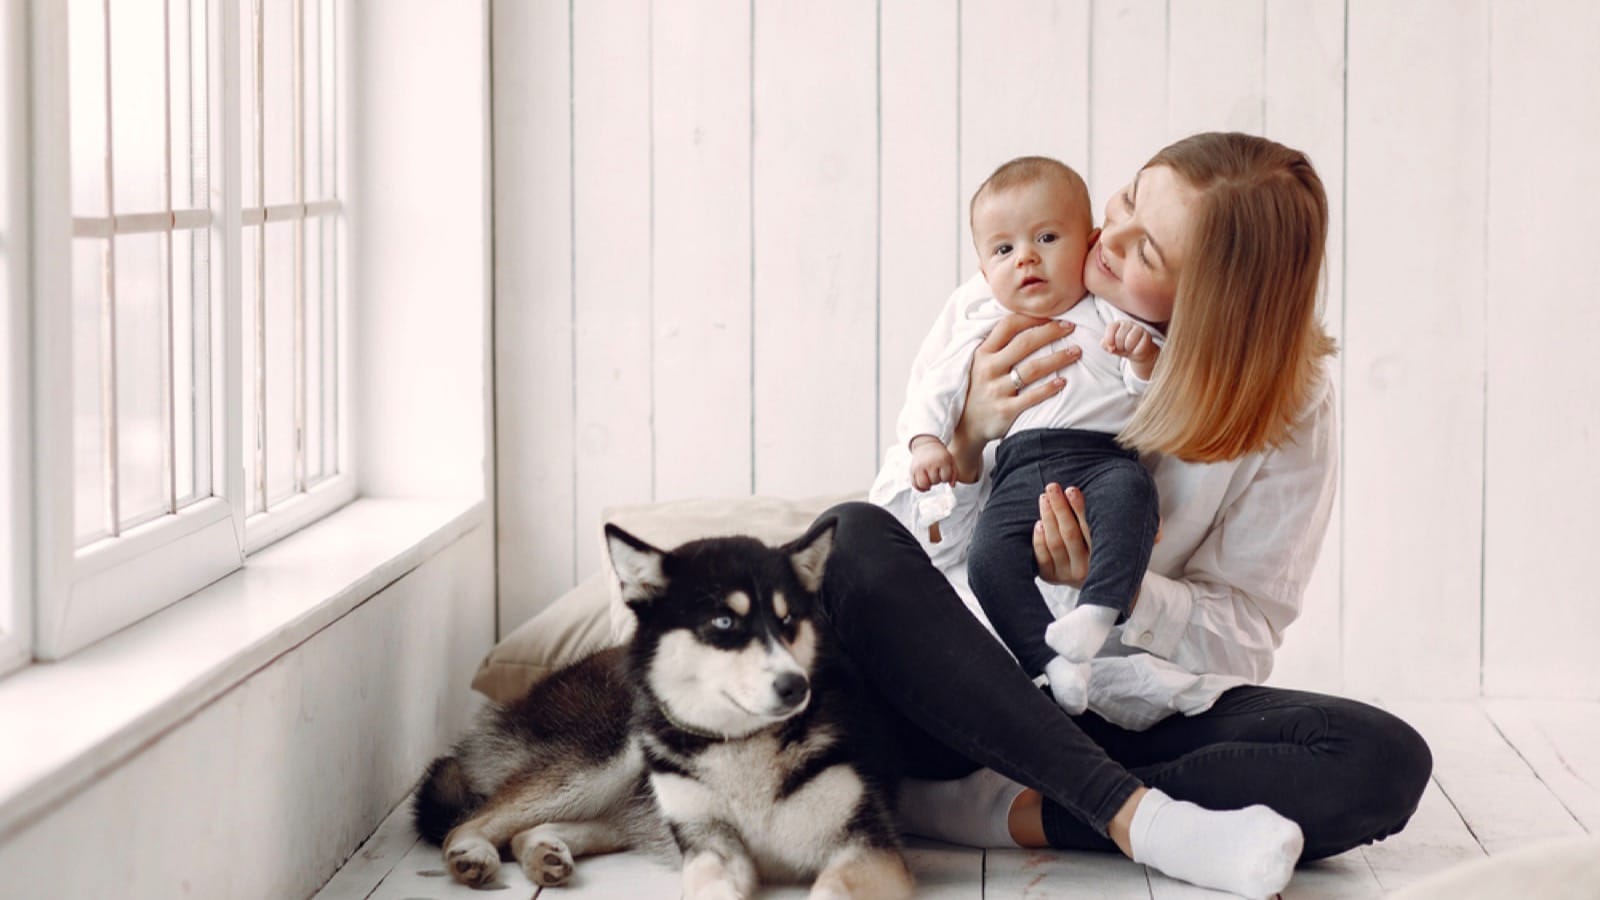 Woman holding baby when dog is near